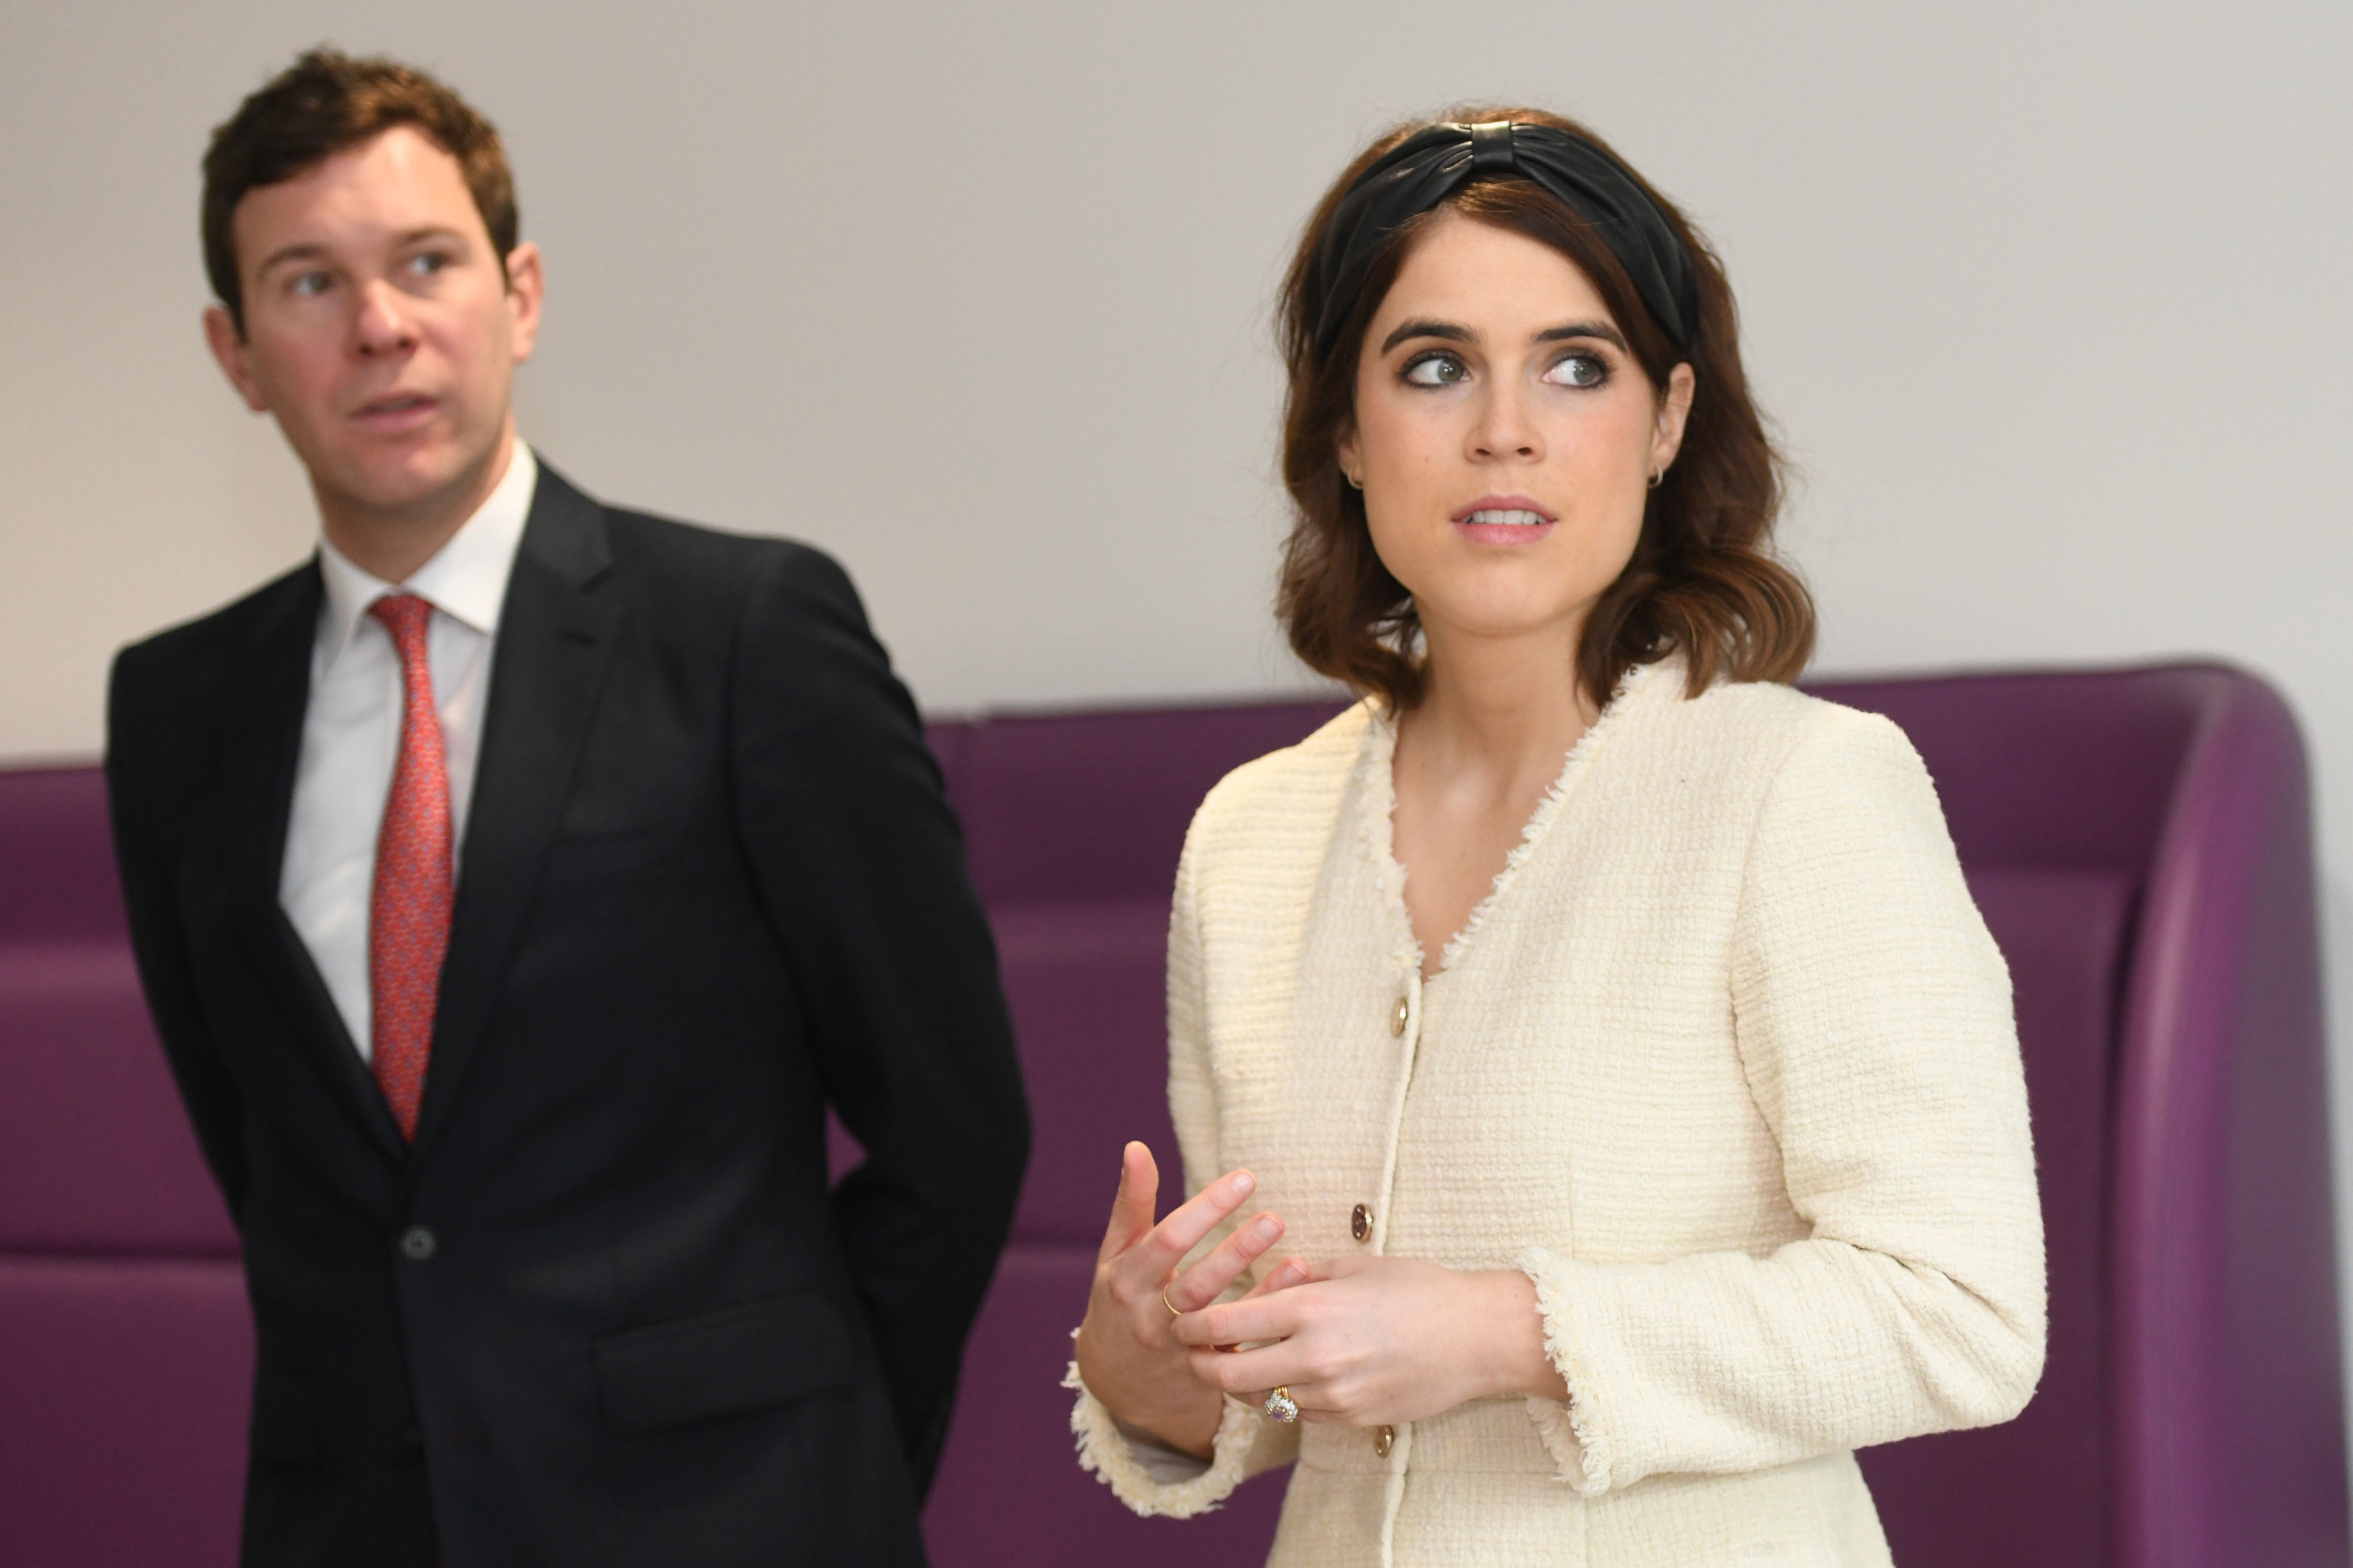 Princess Eugenie and Jack Brooksbank side-by-side during a visit to the Royal National Orthopaedic Hospital